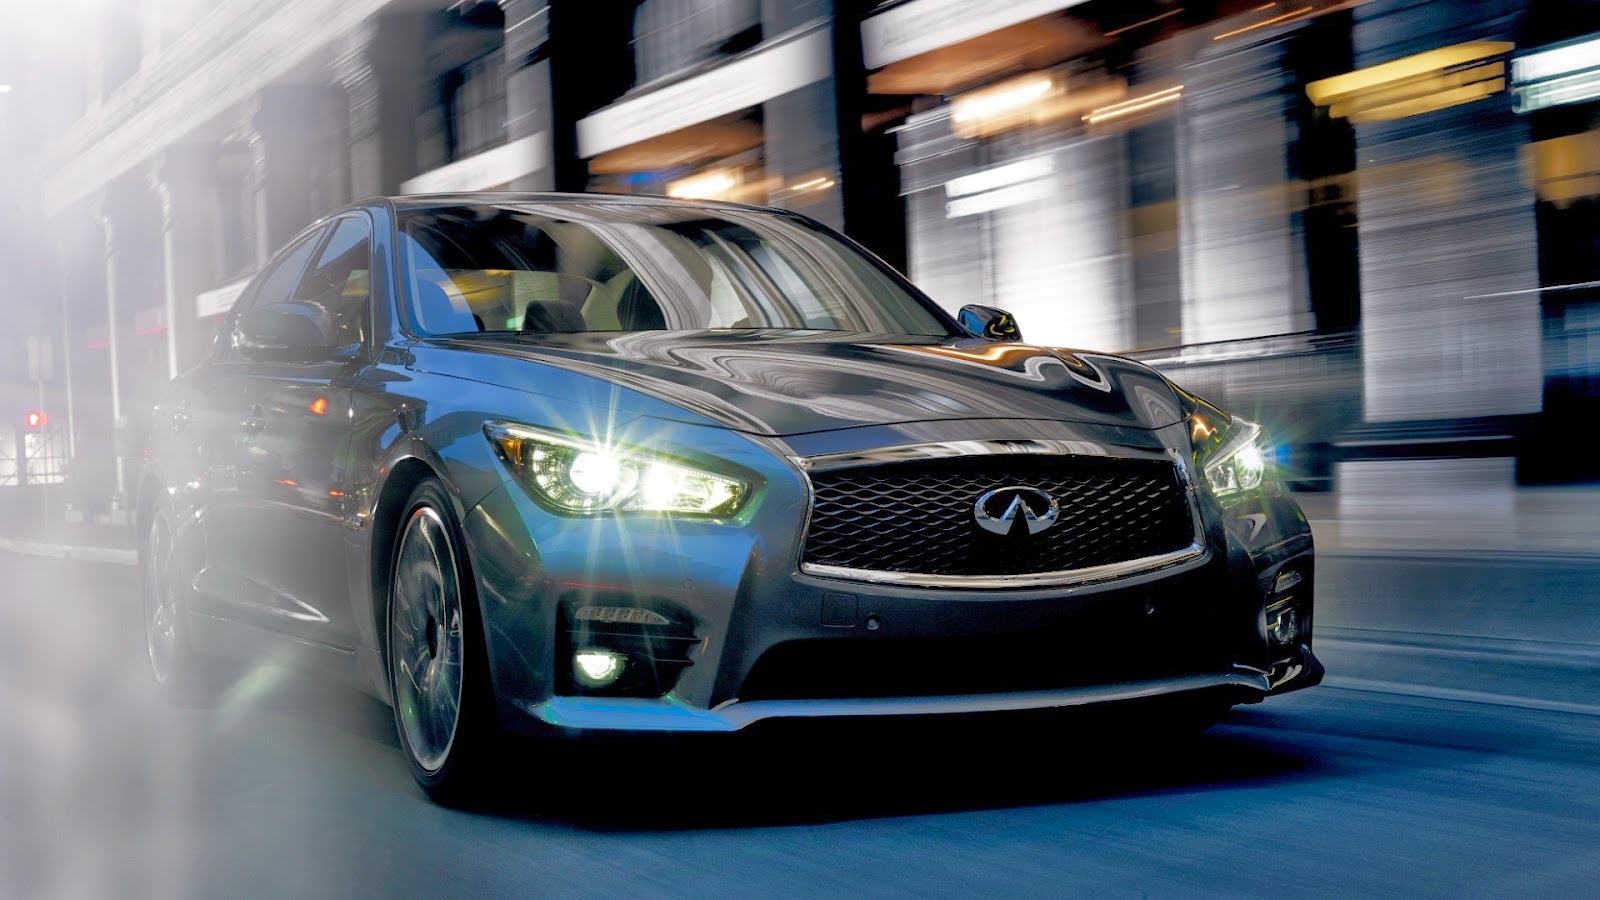 Download Infiniti Q50 wallpapers for mobile phone free Infiniti Q50 HD  pictures